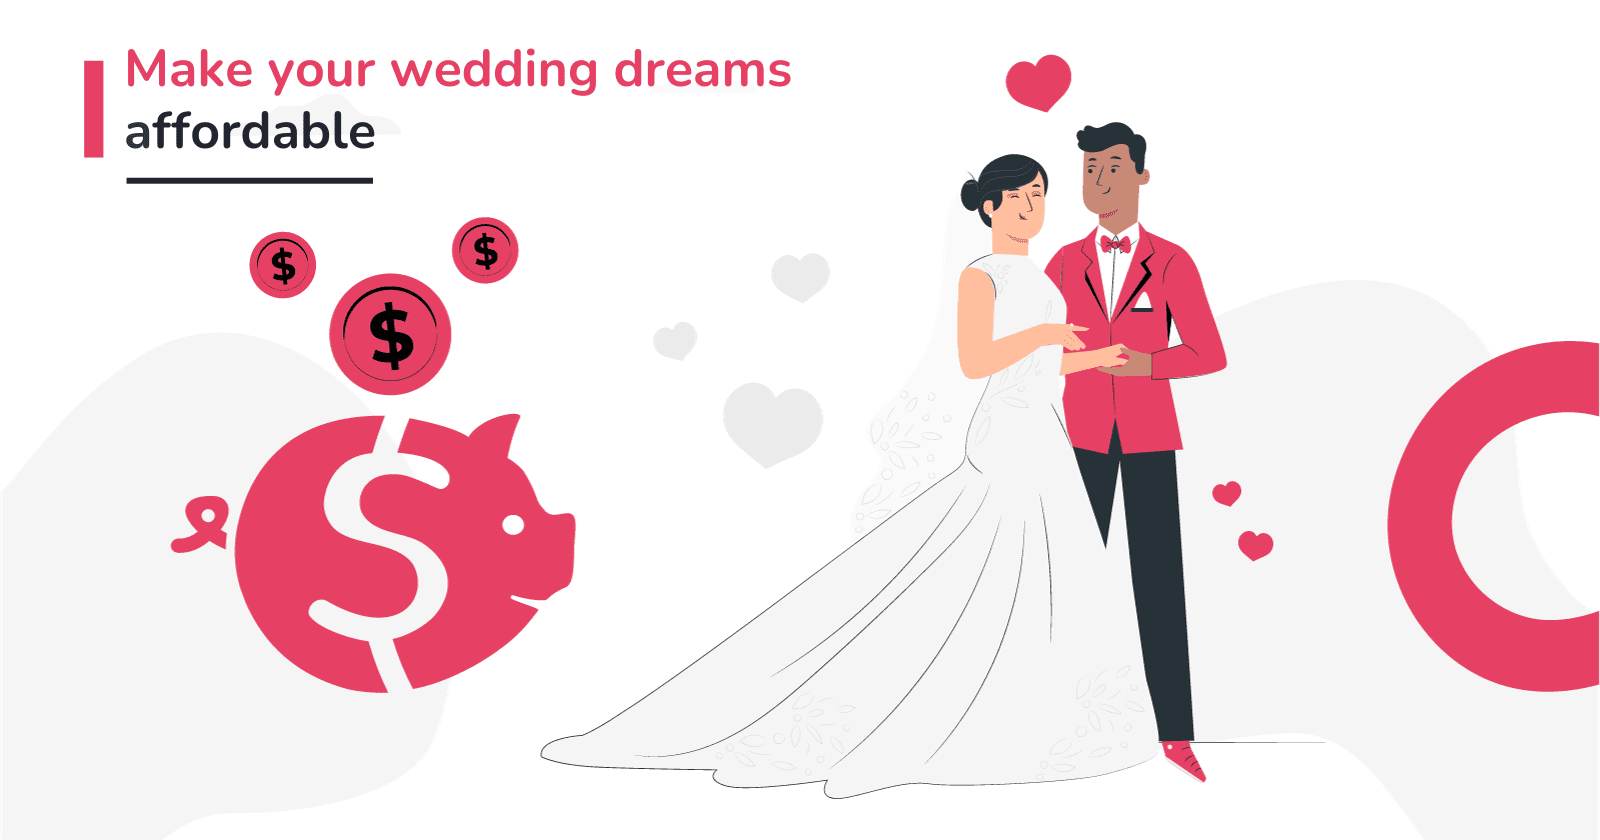 Make your wedding dreams affordable